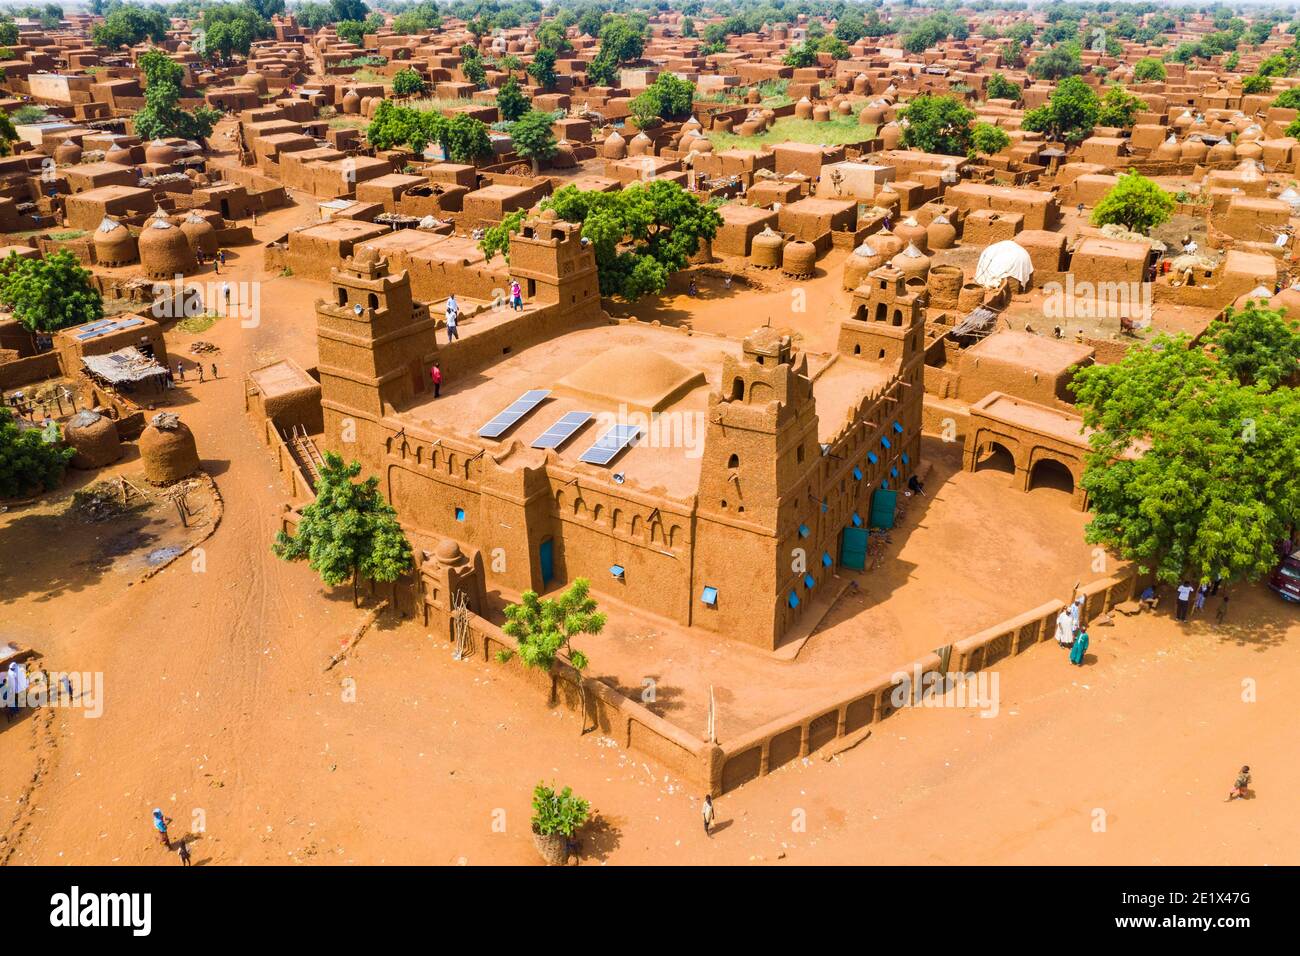 Aerial view, local view, Yama Mosque, Sudano-Sahel Architecture, Yaama, Niger Stock Photo